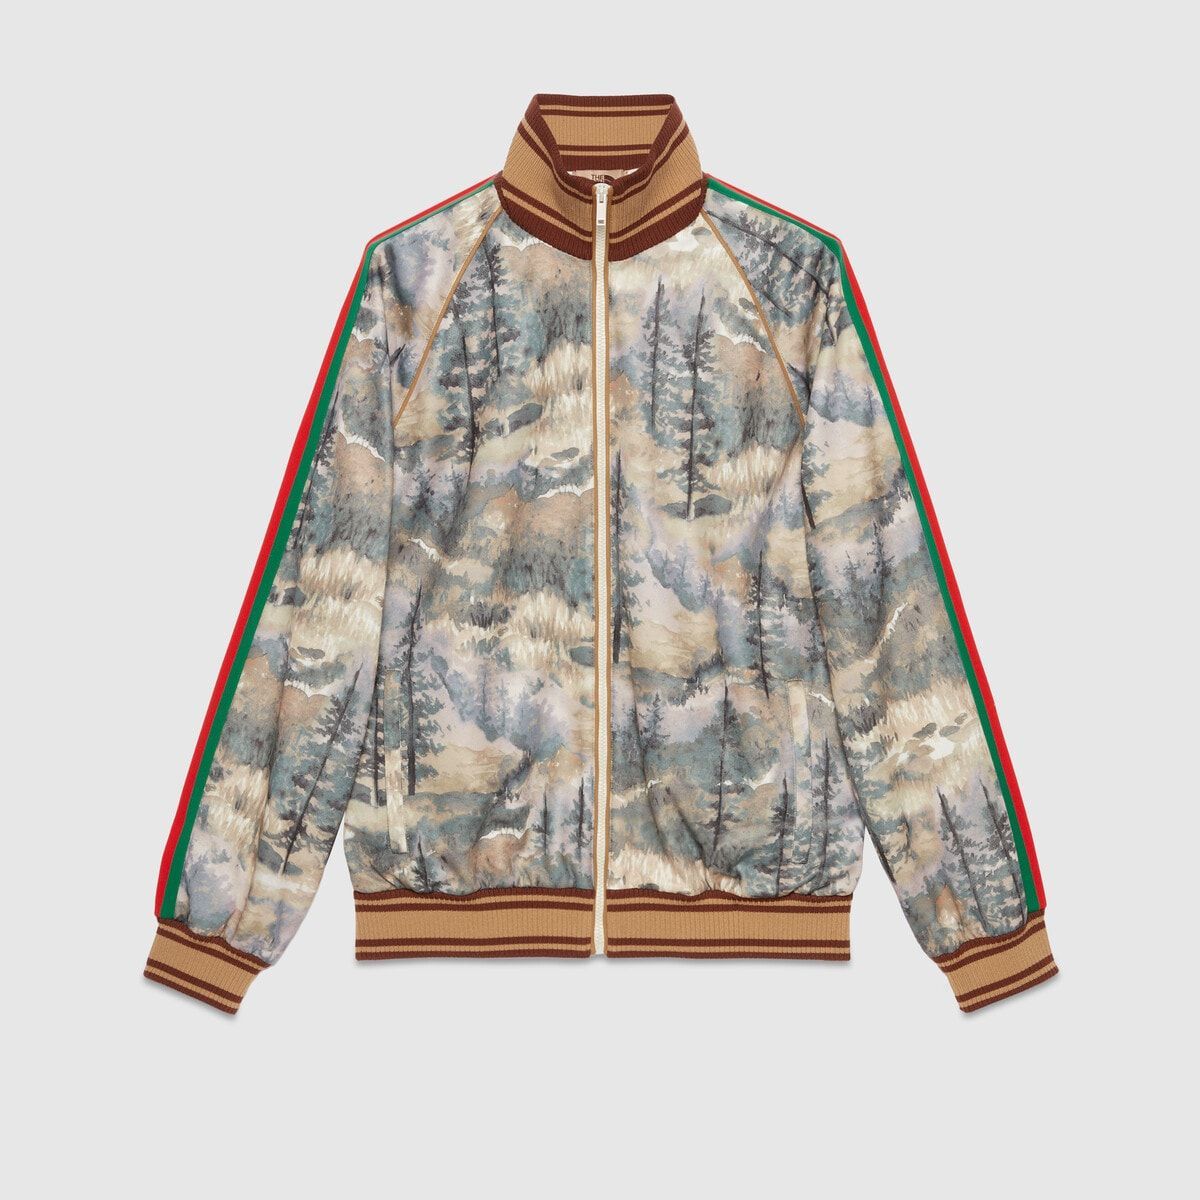 The North Face x Gucci Jacket